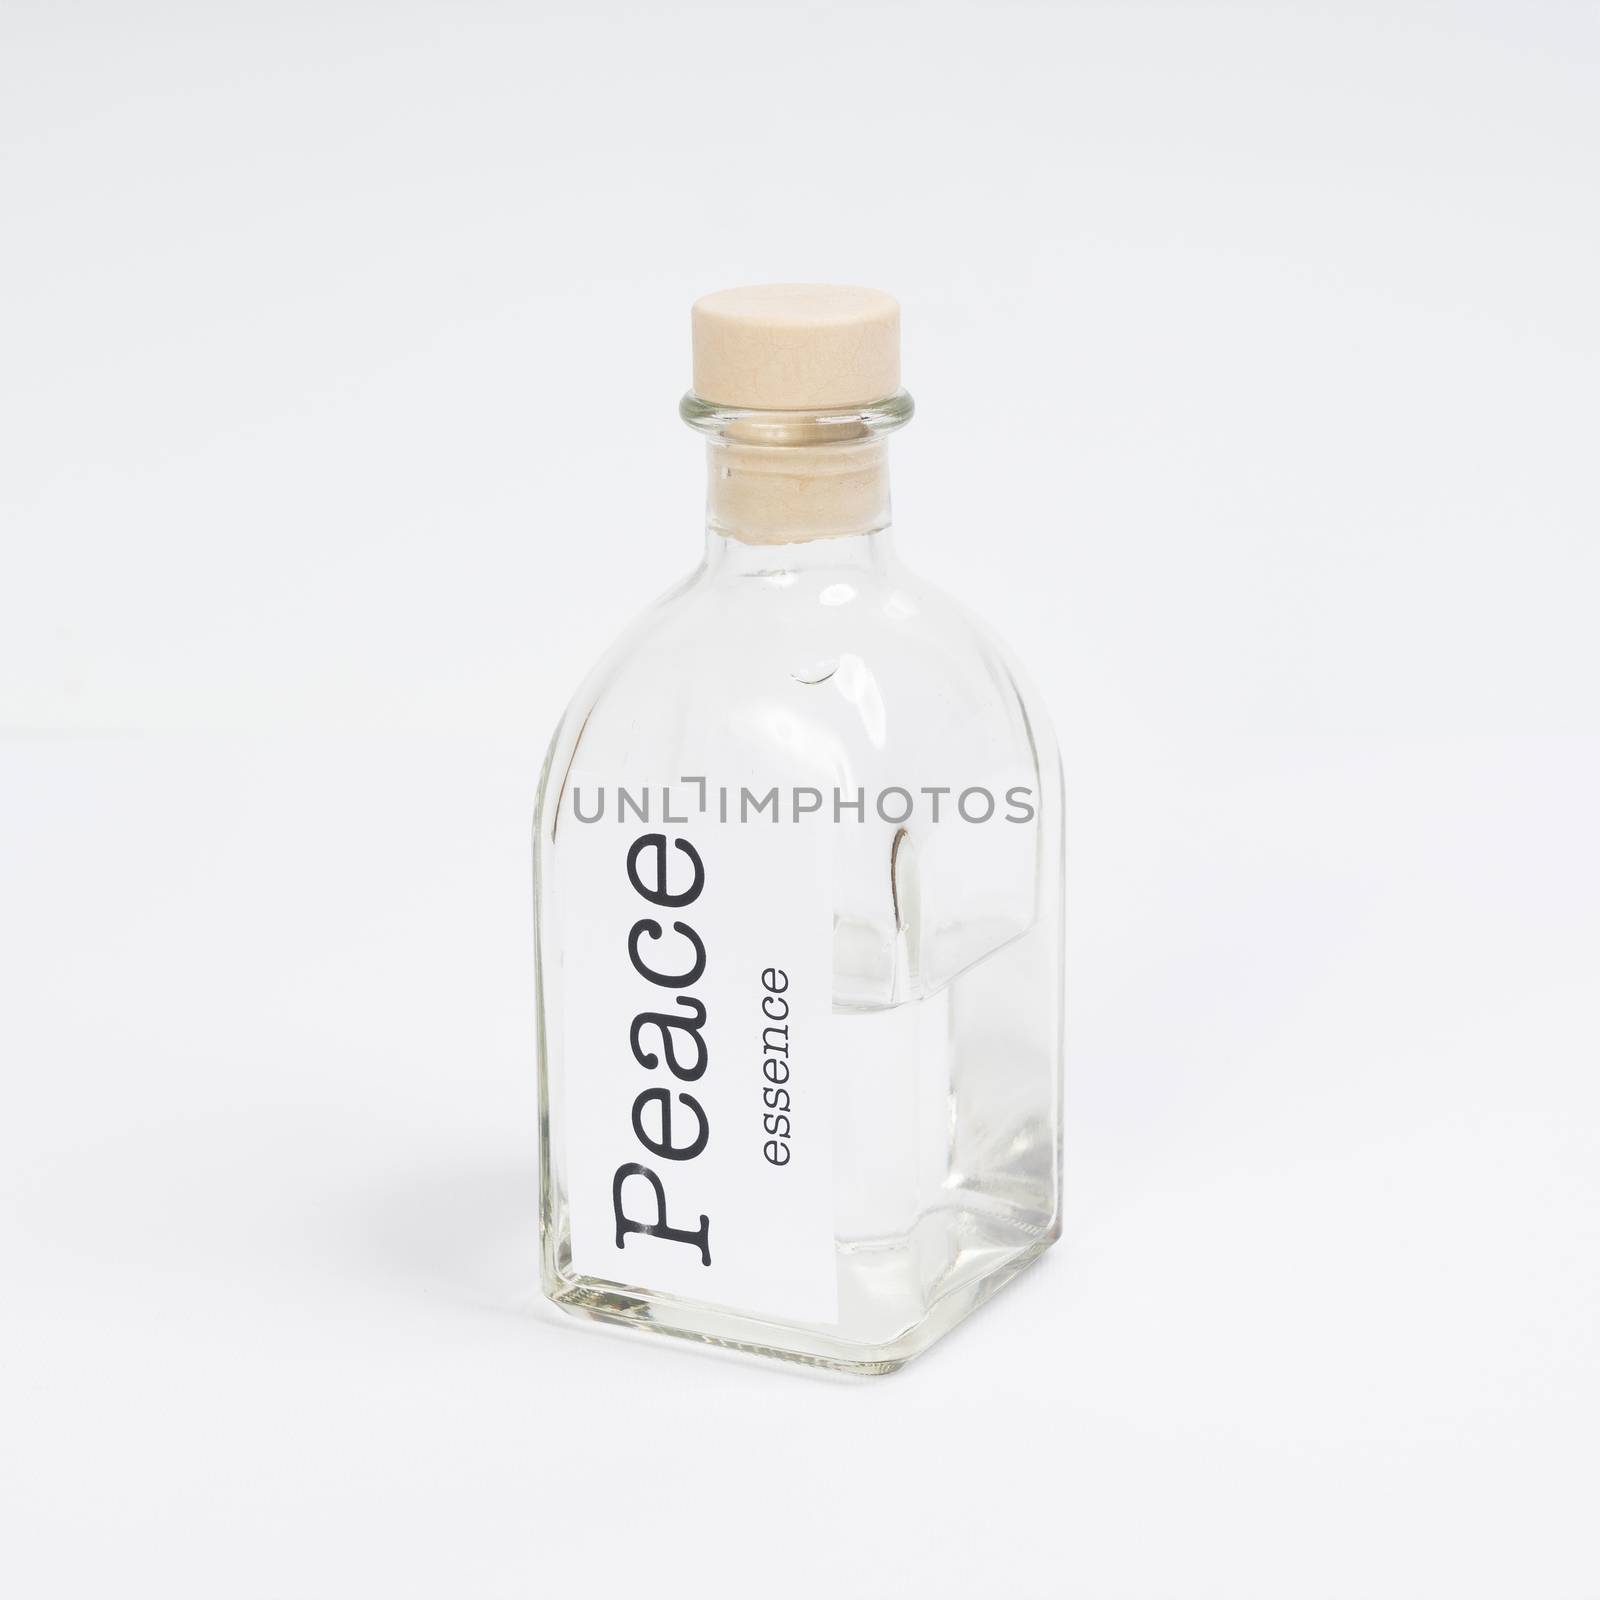 a glass bottle containing Peace essence